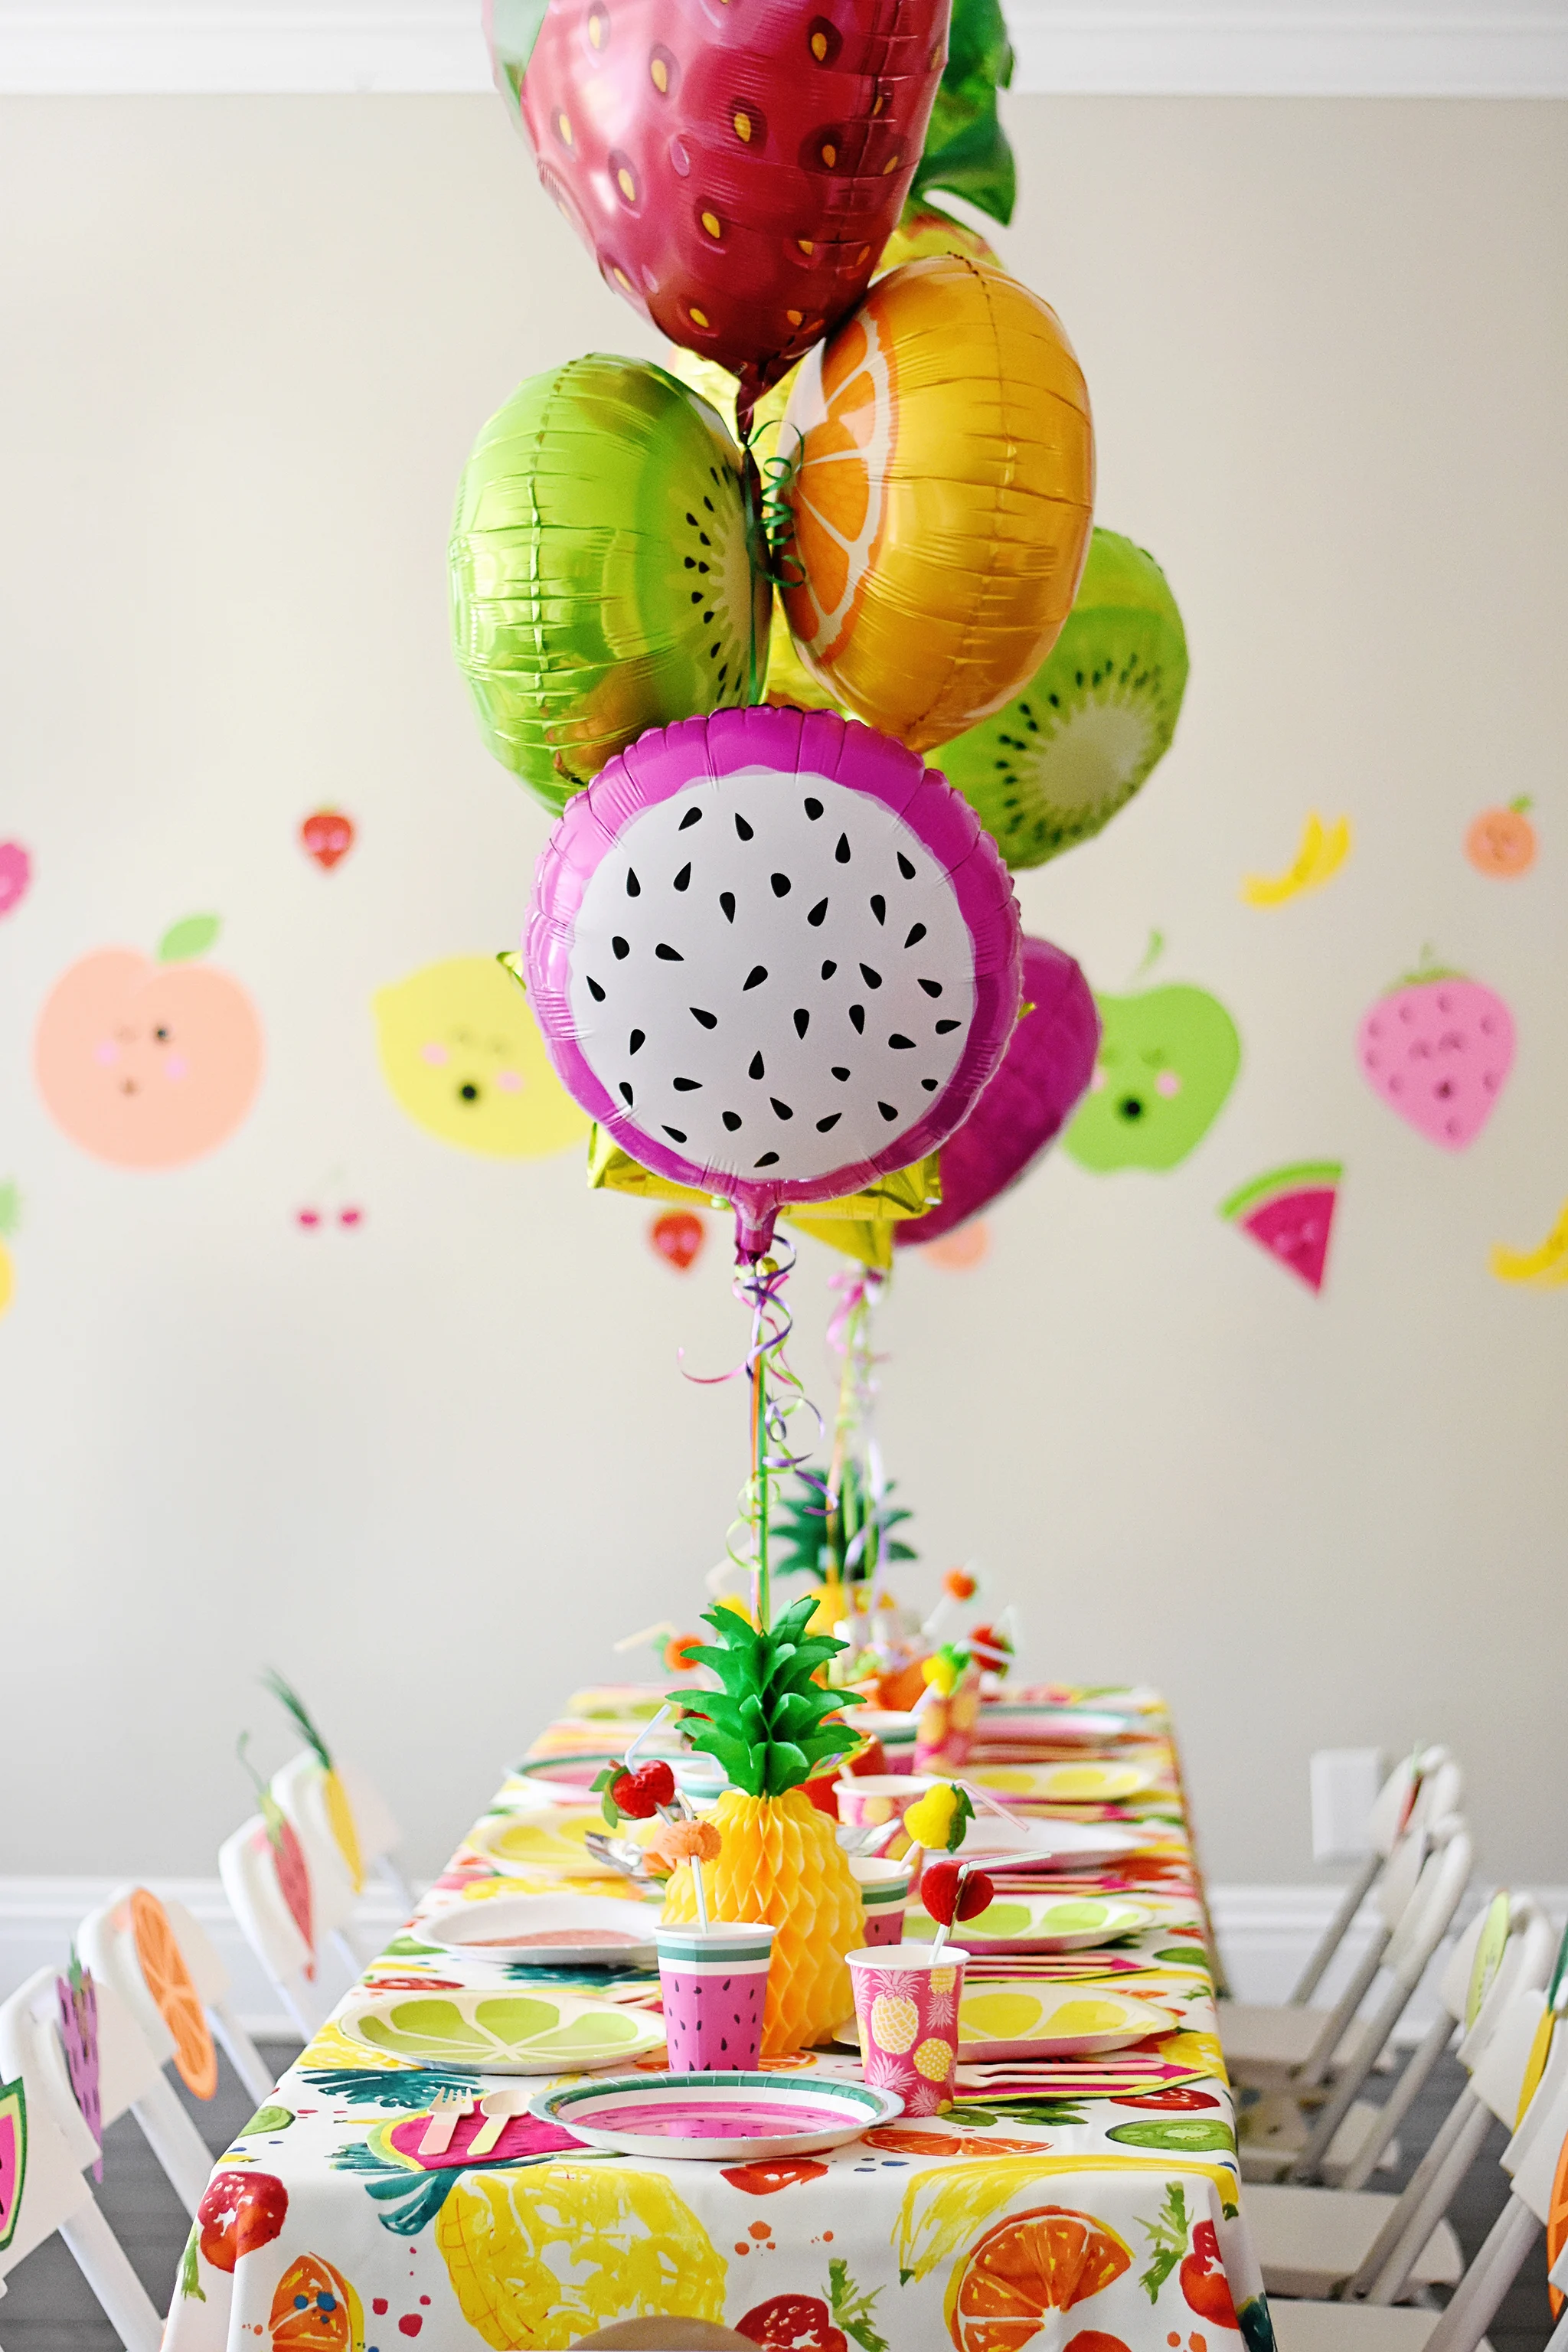 Tutti Frutti Birthday Party Kids Party Tables and Balloons - Project Nursery